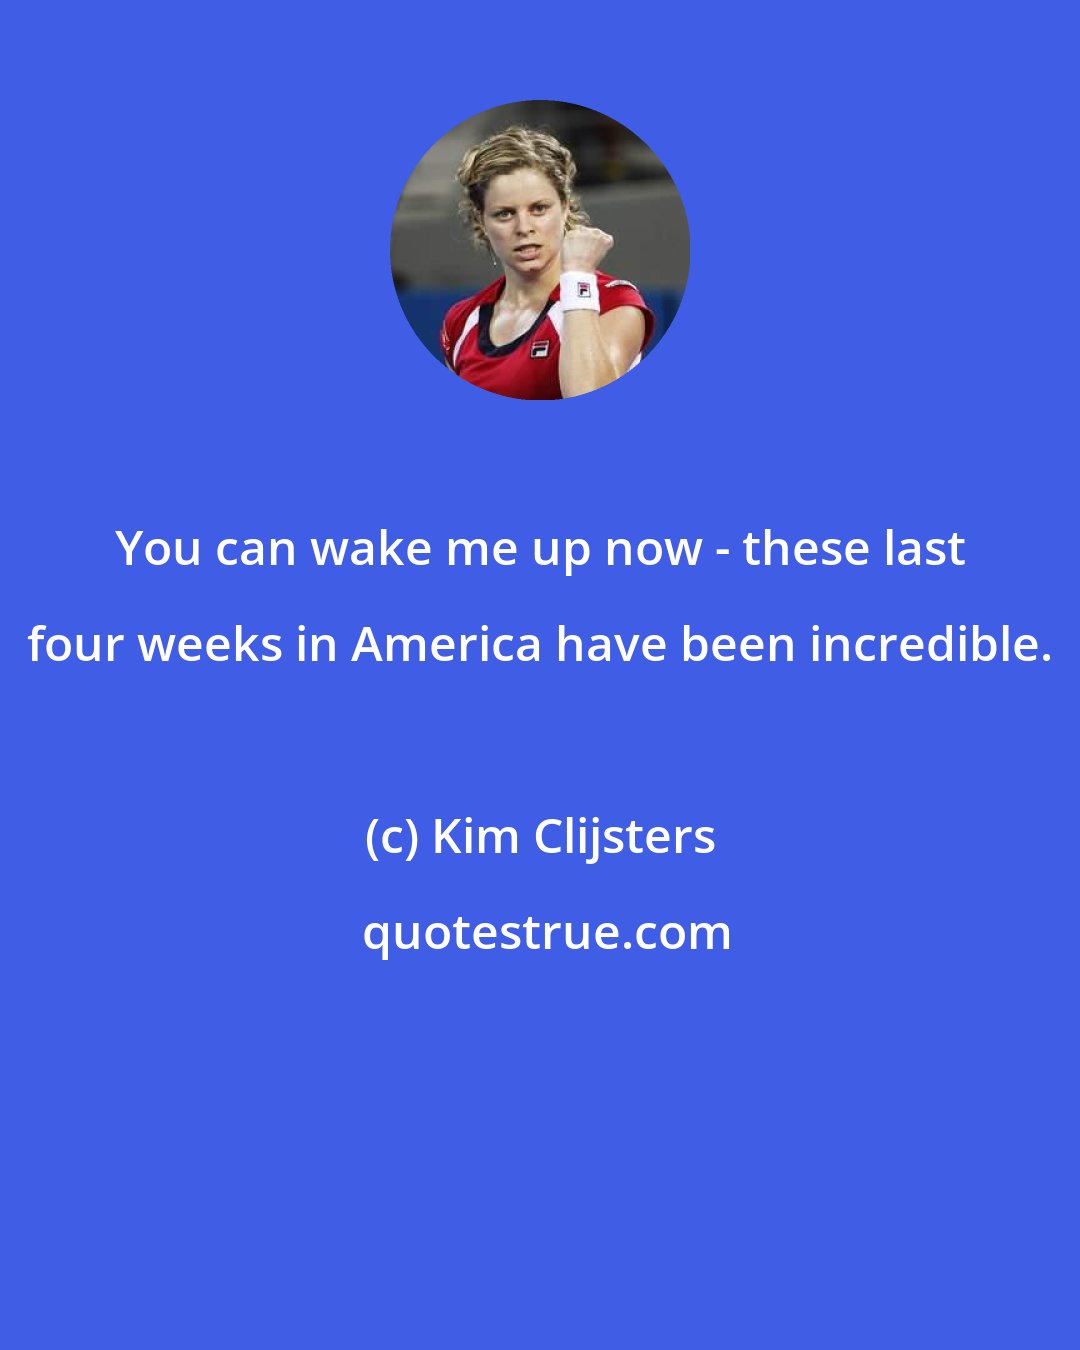 Kim Clijsters: You can wake me up now - these last four weeks in America have been incredible.